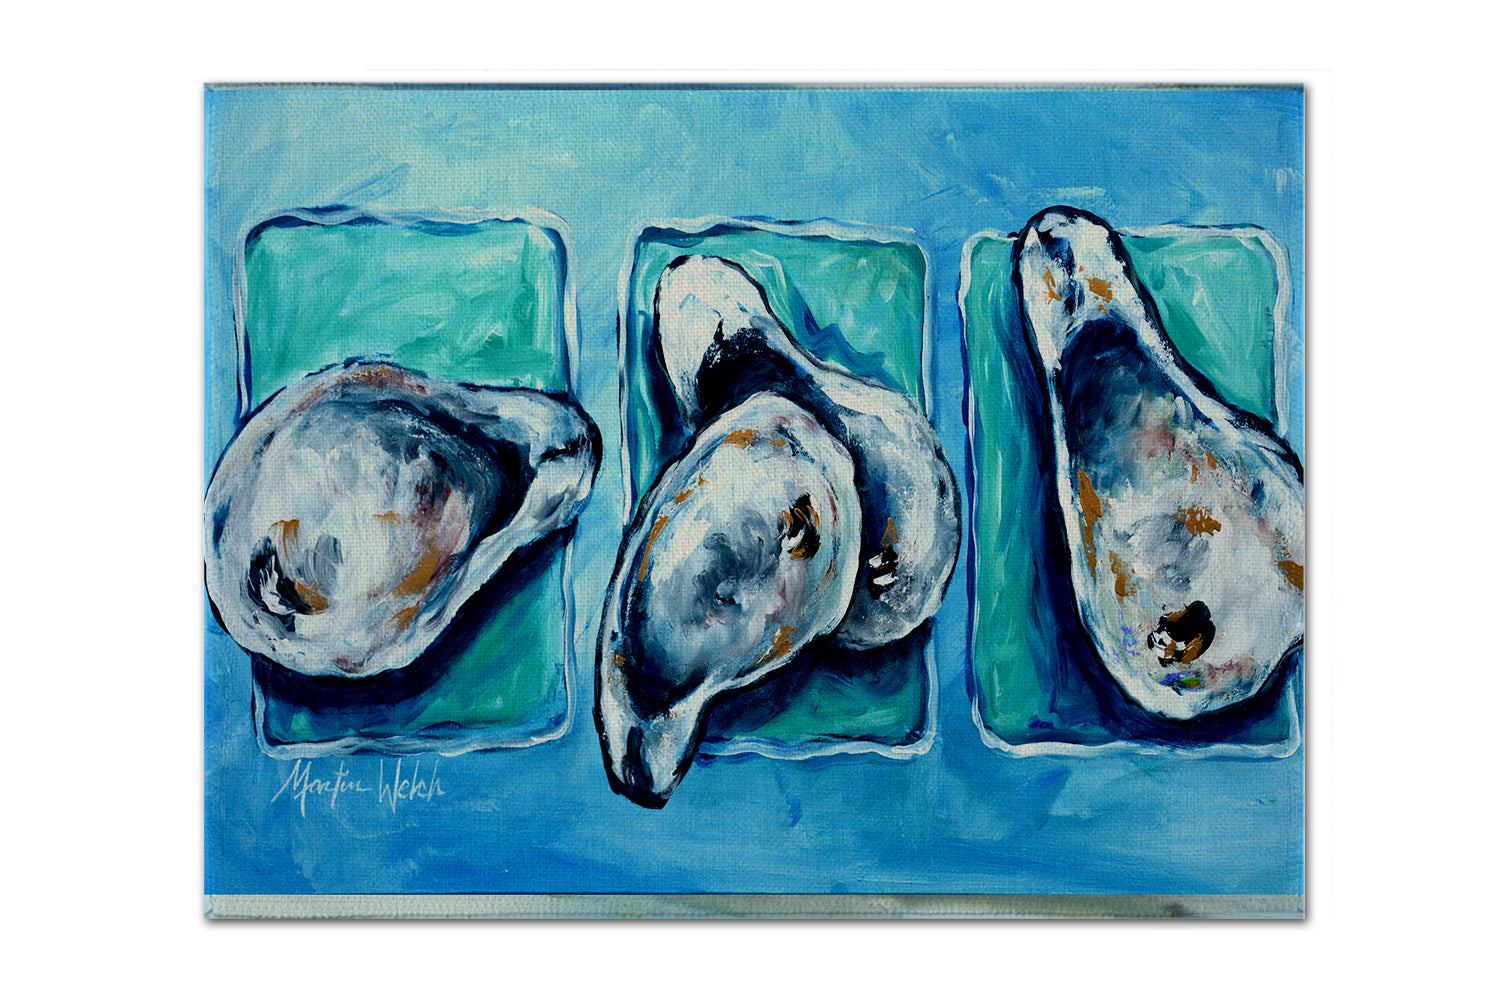 Buy this Oysters Oyster + Oyster = Oysters Fabric Placemat